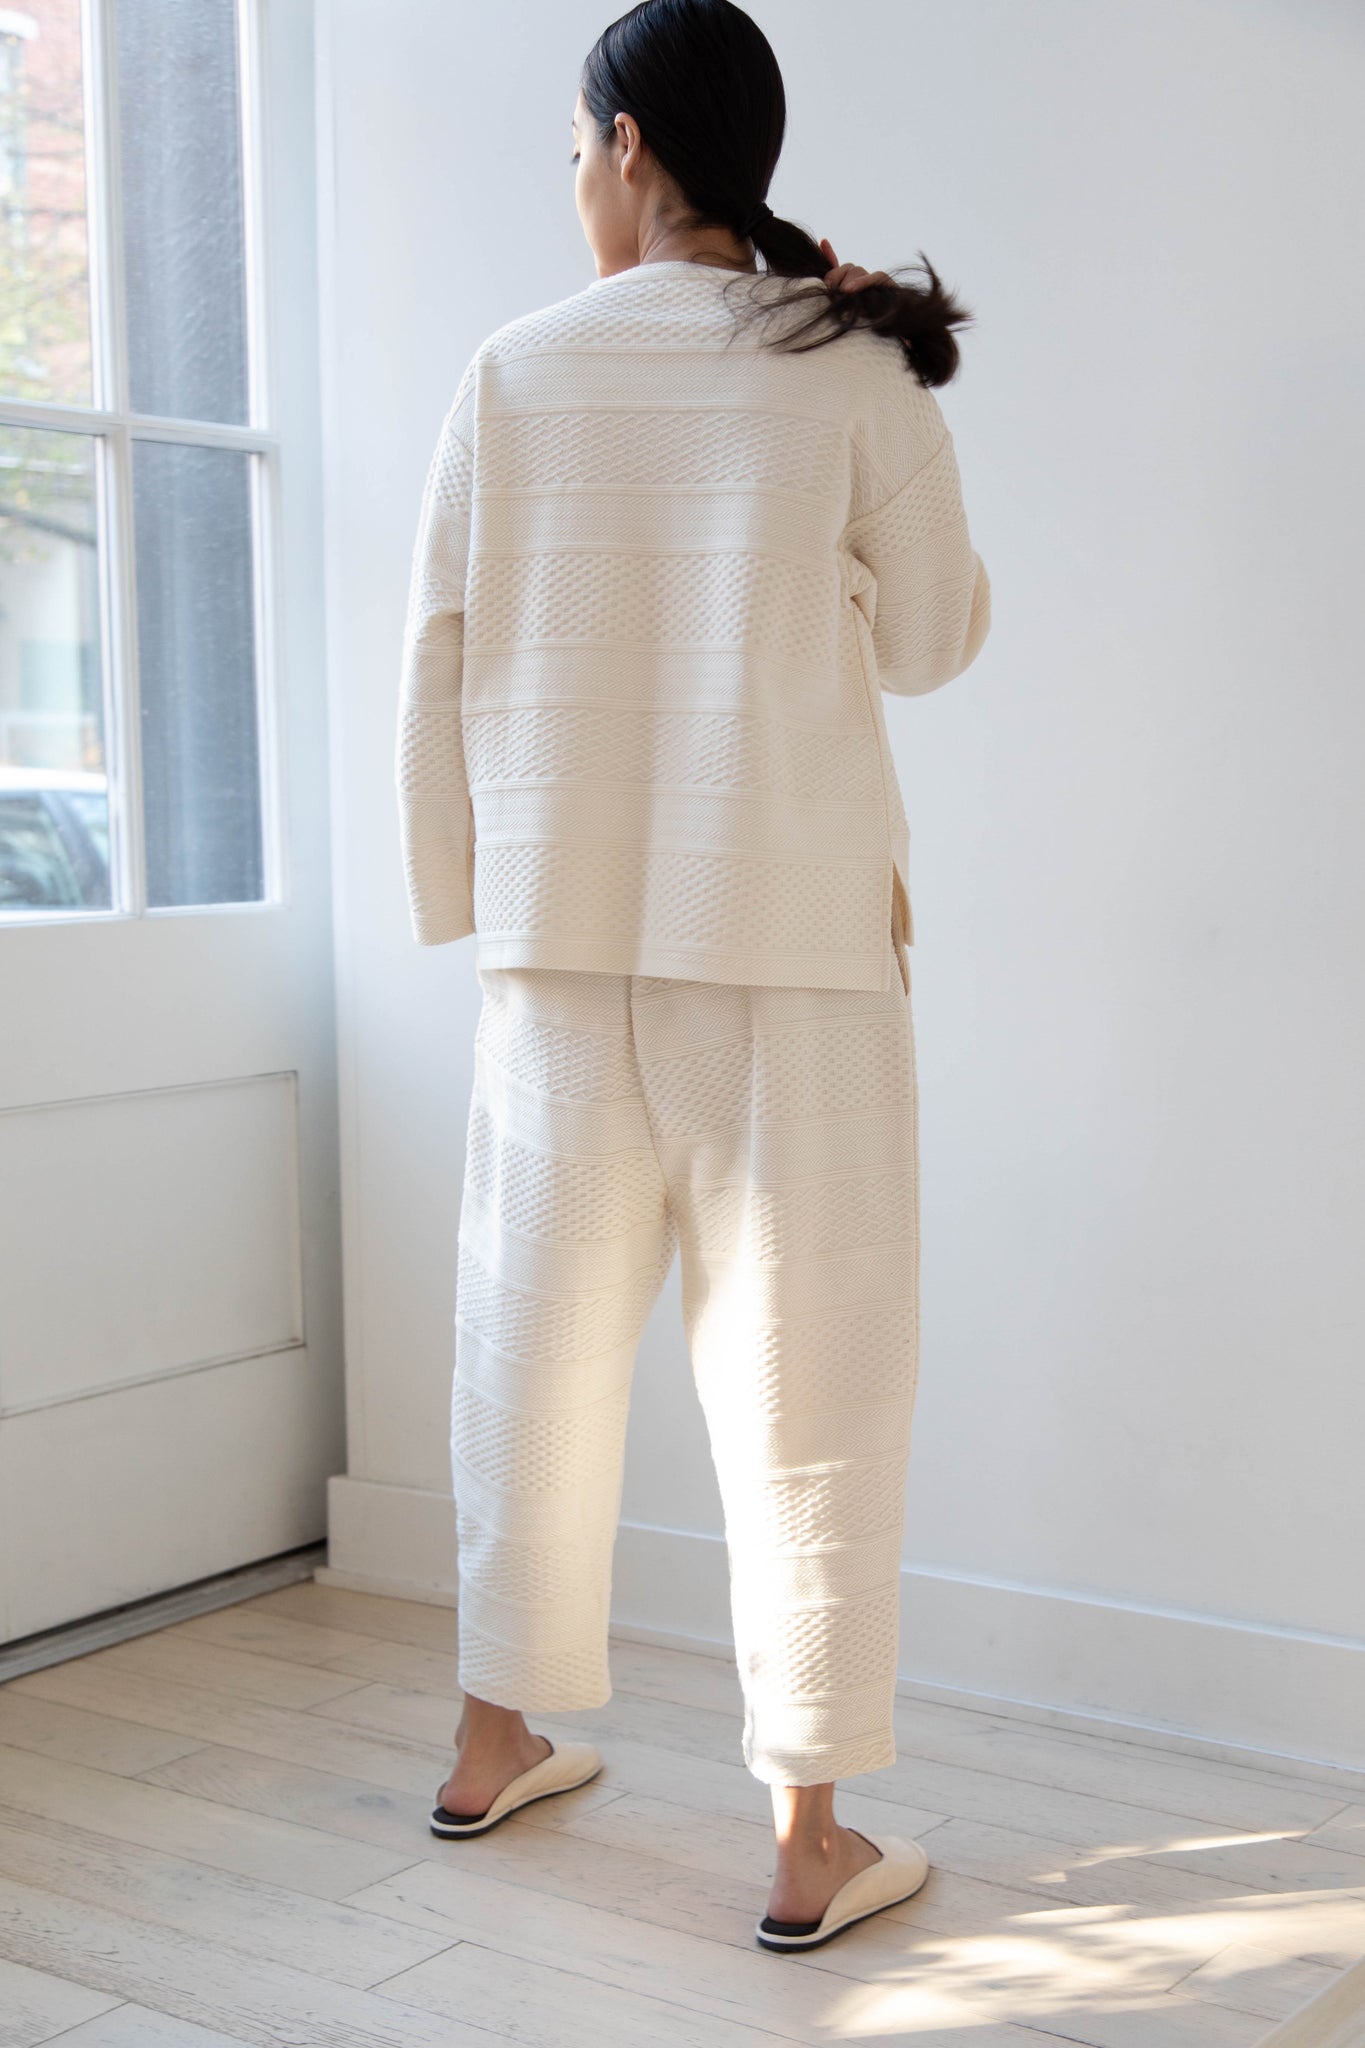 Robe de Peau by Gauze Cable Tapered Pants in Ivory